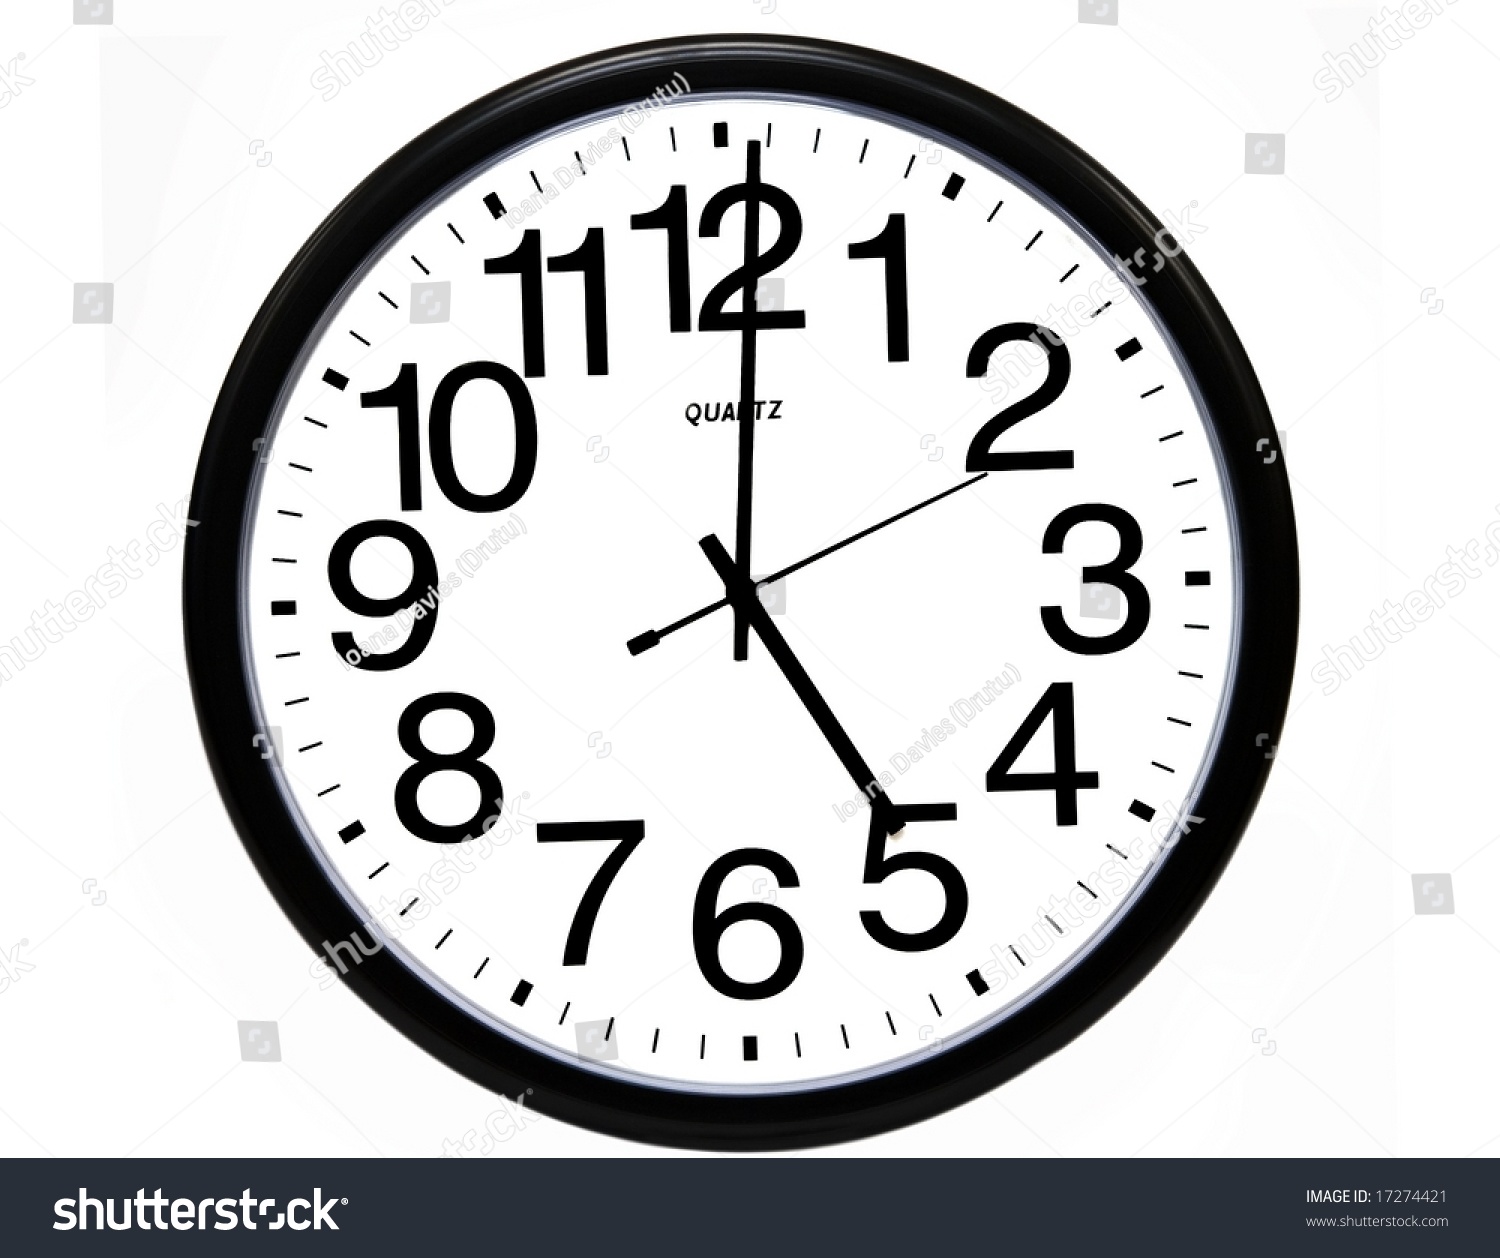 Office Clock Showing 5 O'Clock, Isolated On White Stock Photo 17274421 ...